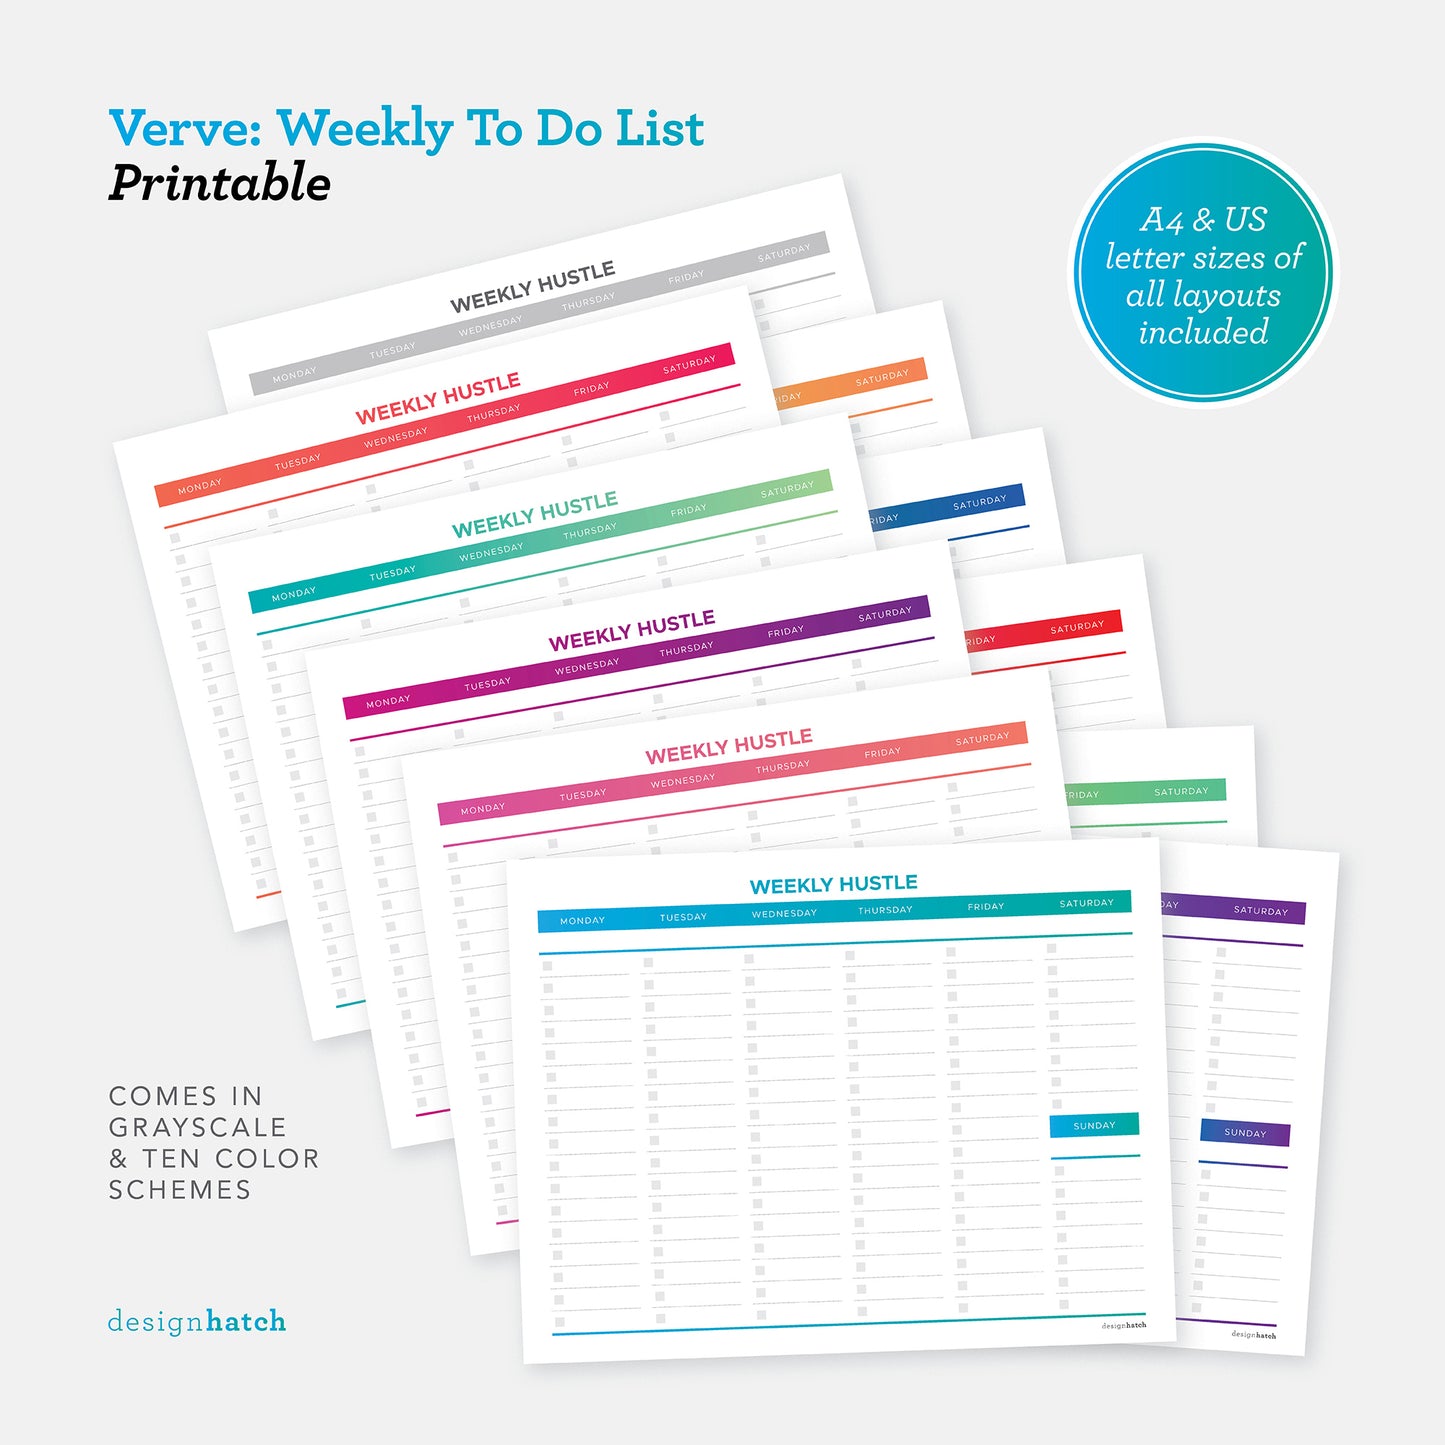 Verve: Weekly To Do List